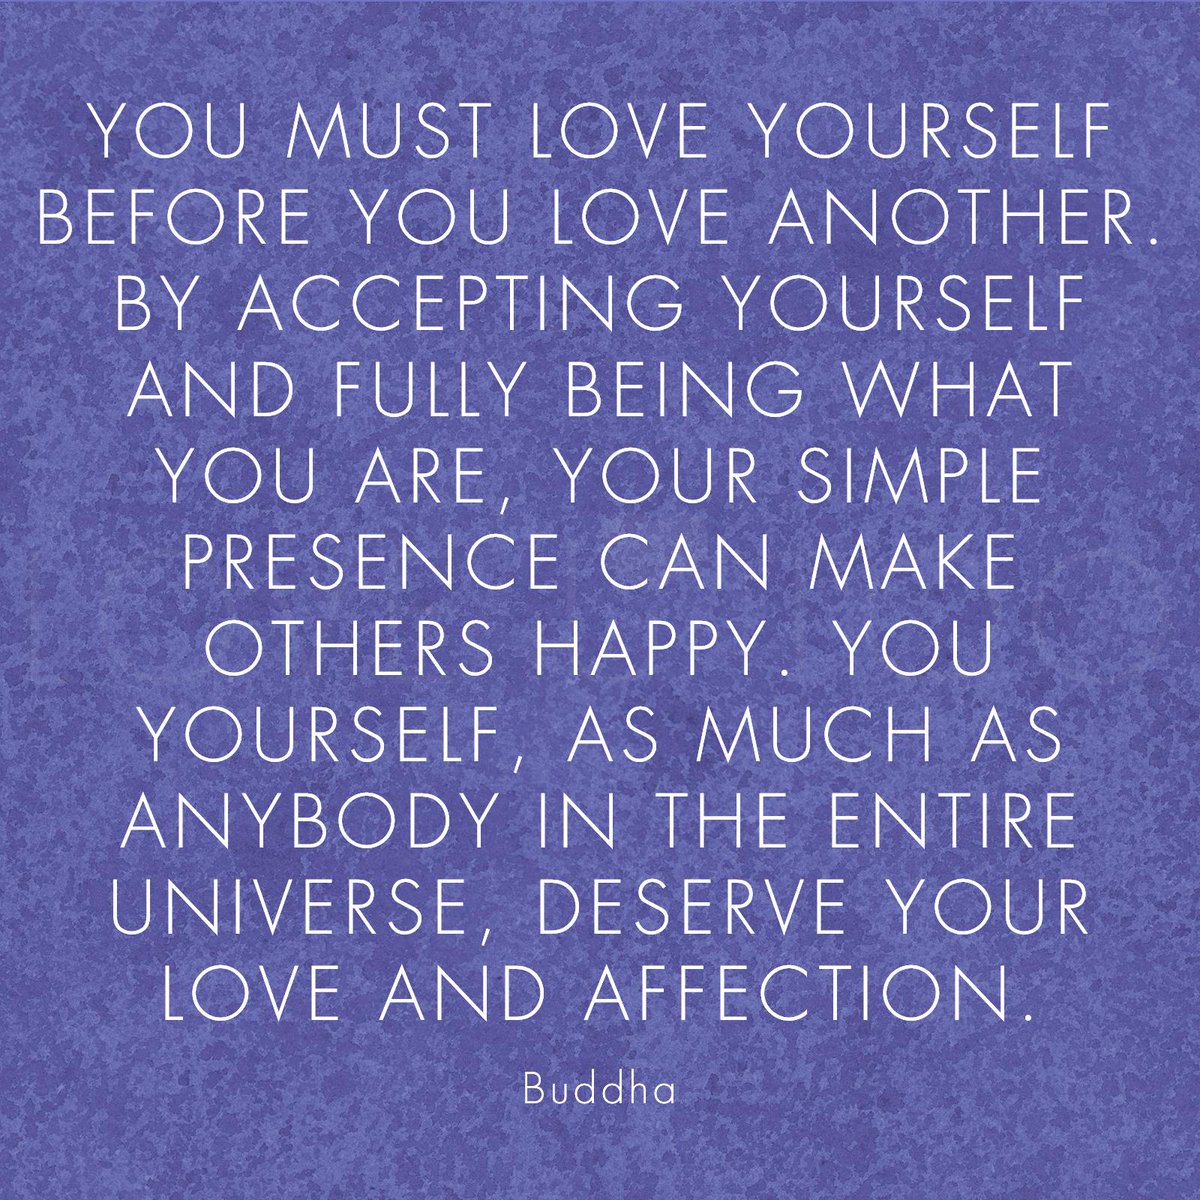 Love U Too You Must Love Yourself Before You Love Another By Accepting Yourself And Buddha Quotes Selflove Http T Co Ui1xrwoeeh